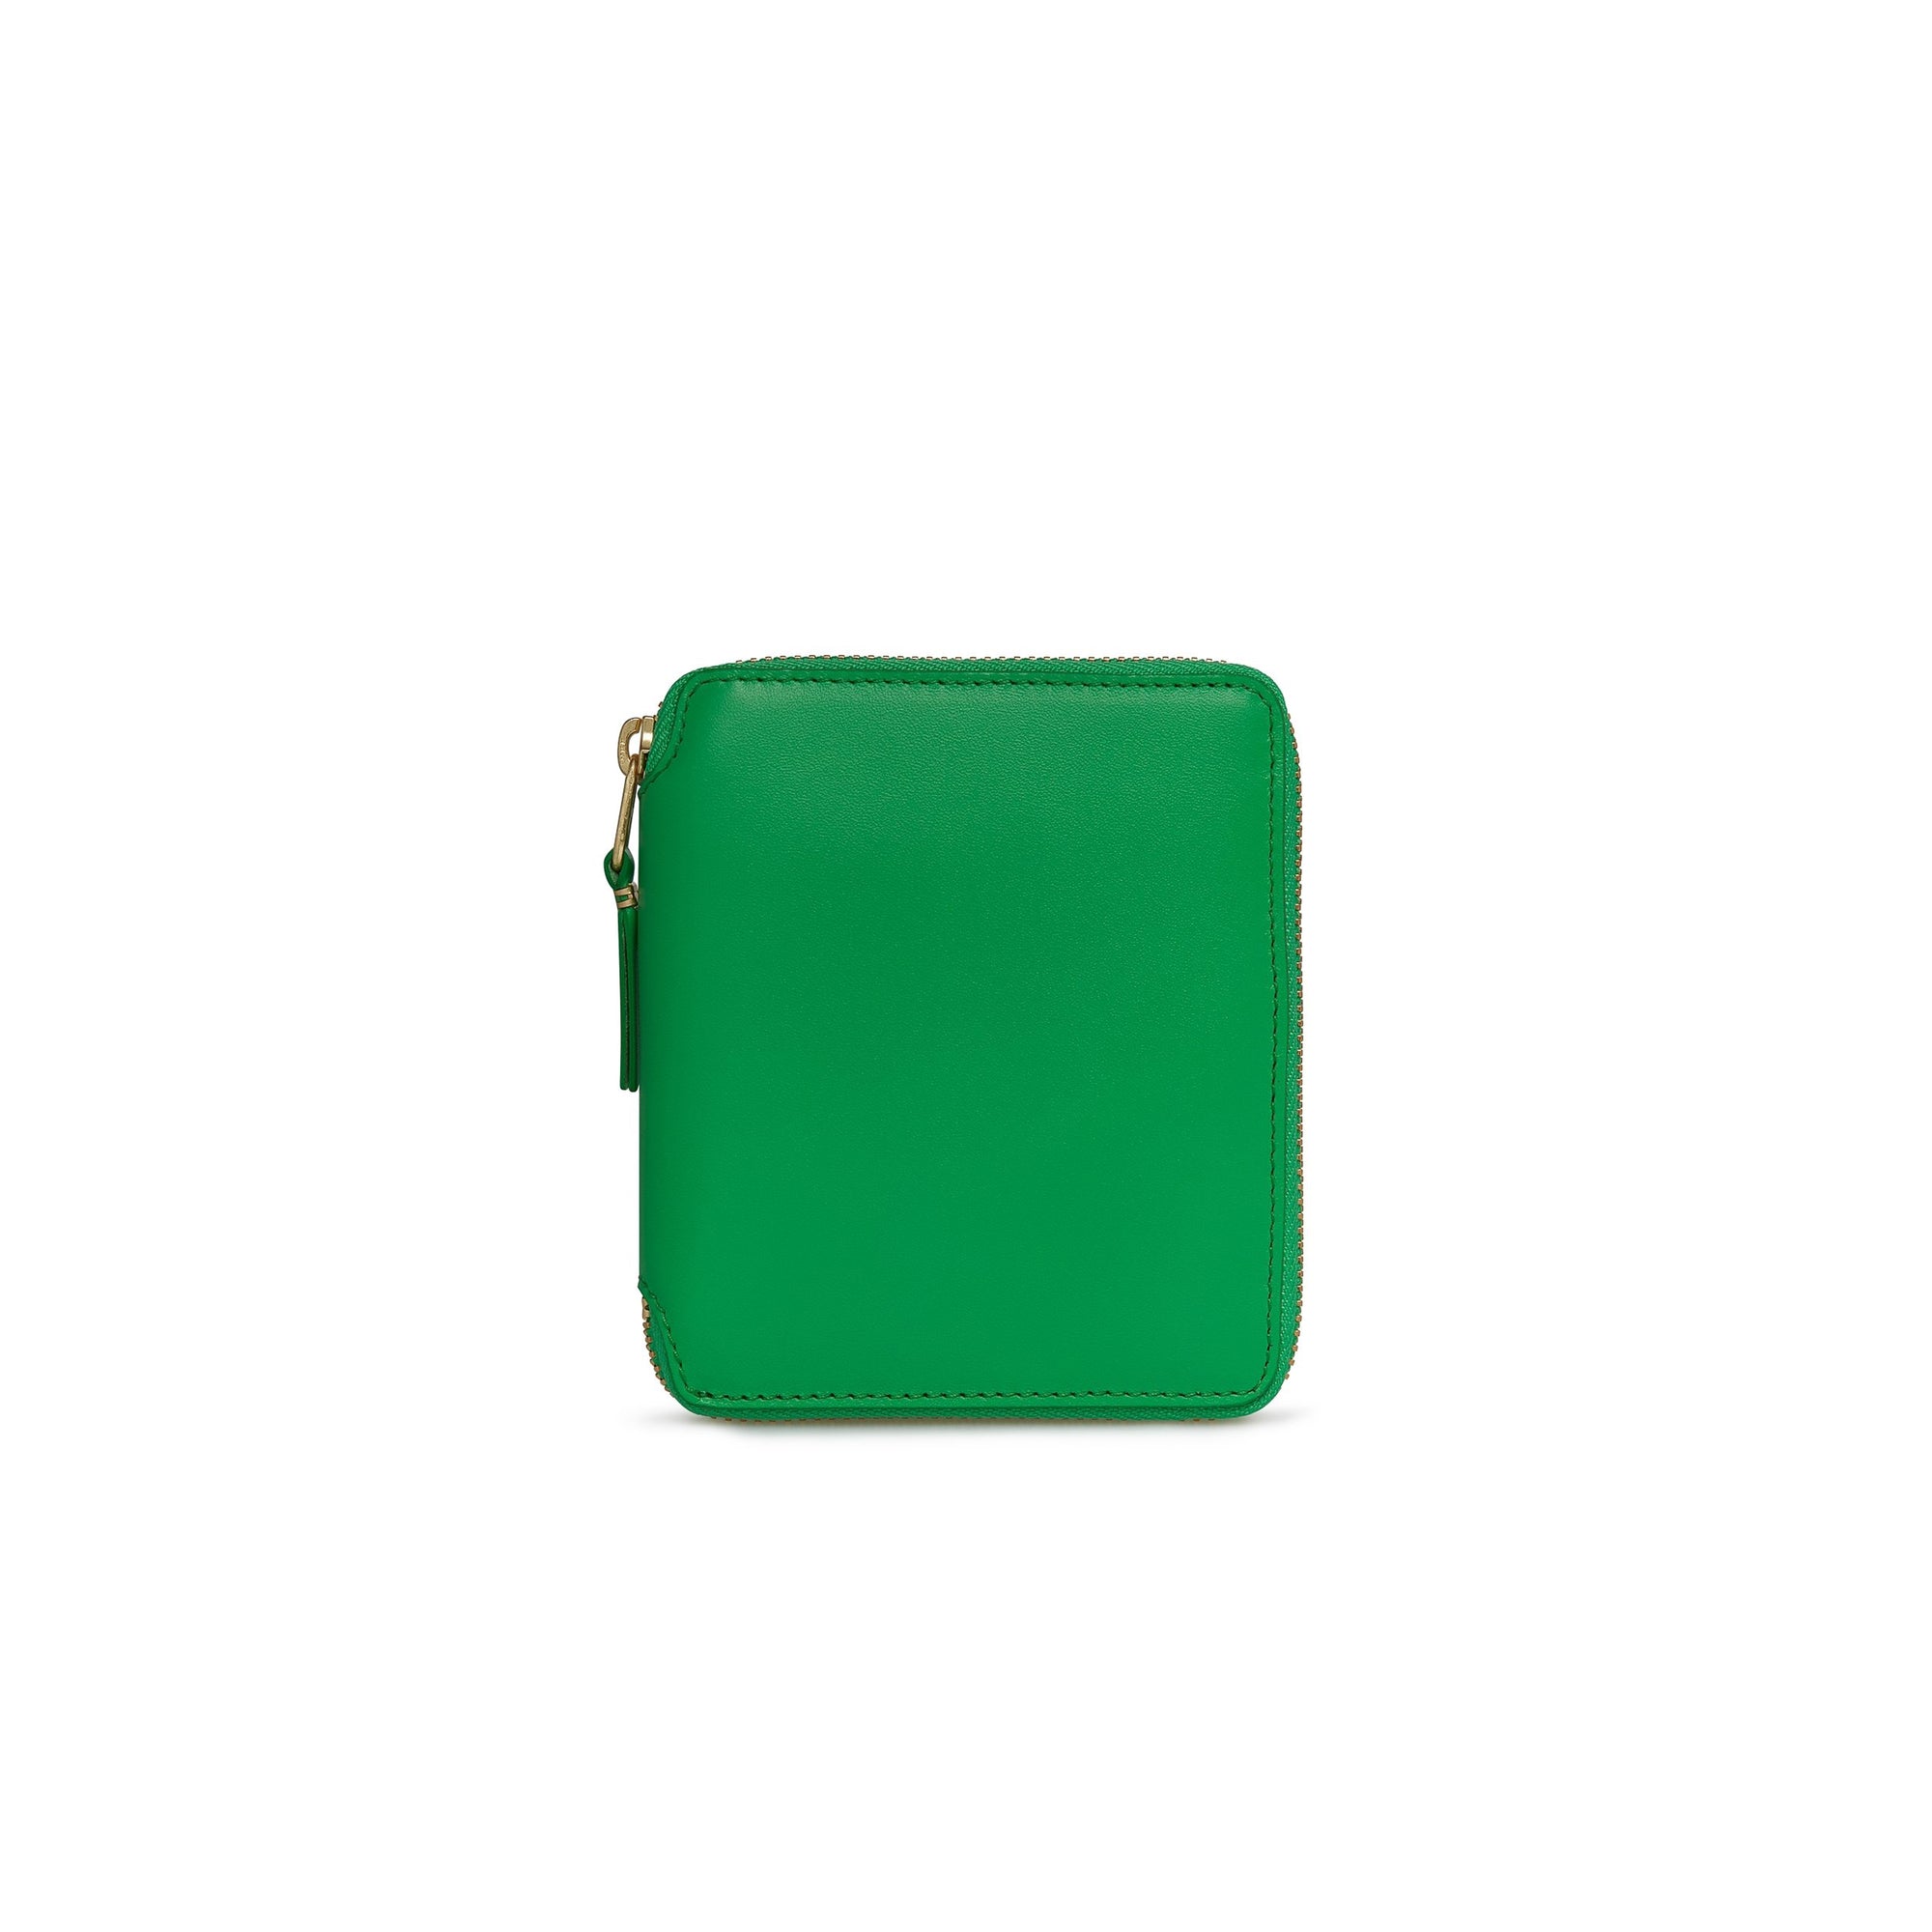 CDG WALLET - Colored Leather - (SA2100 Green) view 1